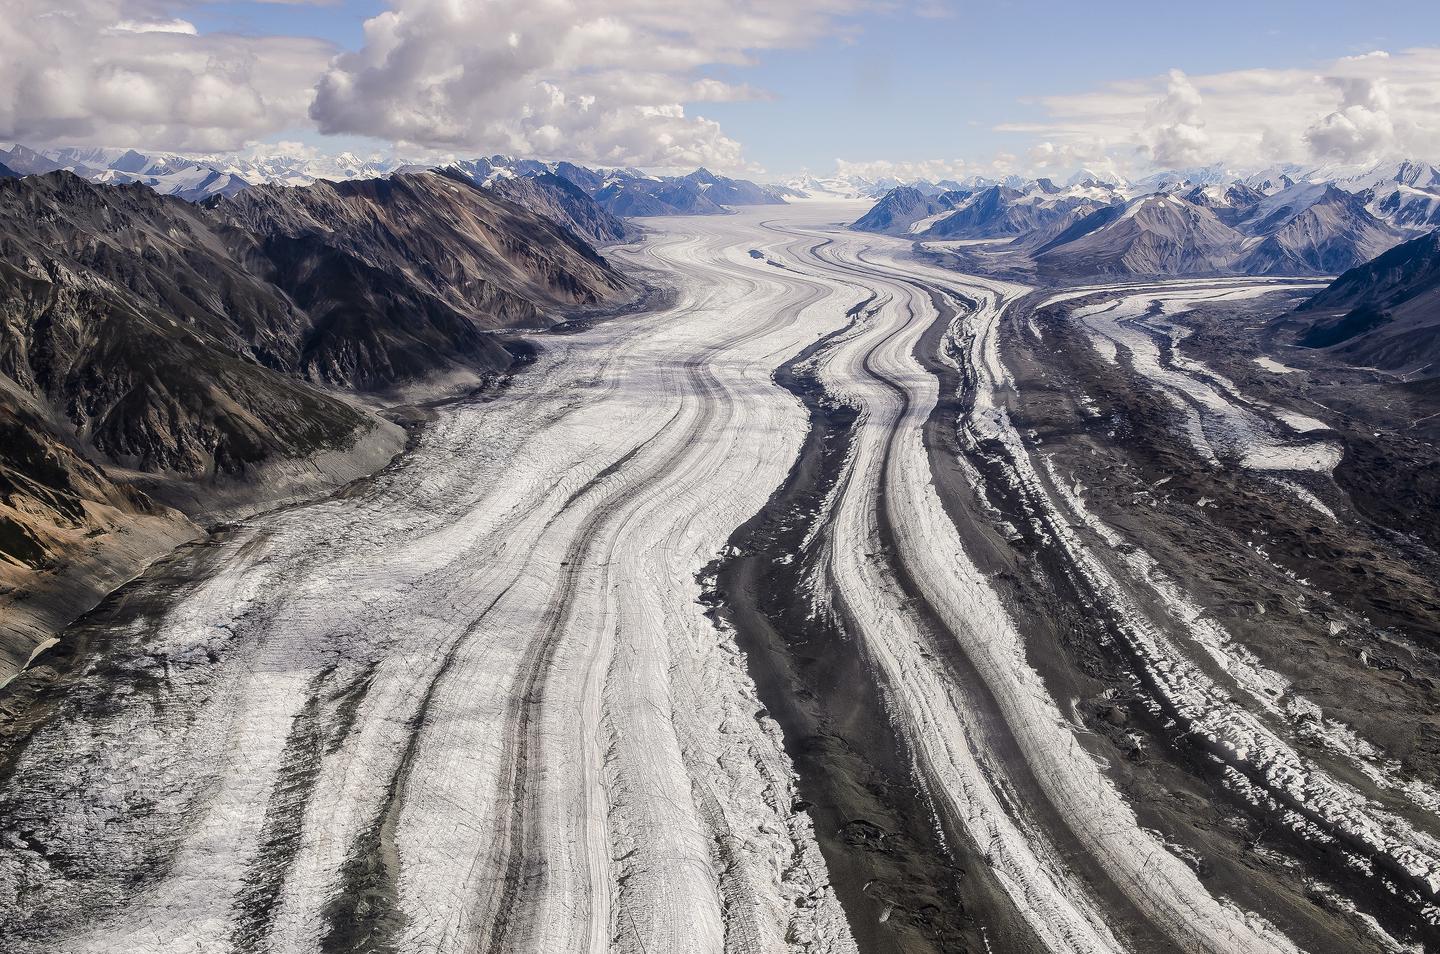 Logan GlacierWrangell-St. Elias National Park contains the greatest concentration of glaciers in North America.  More than 3000 glaciers covering over three million acres of land are found in the park.